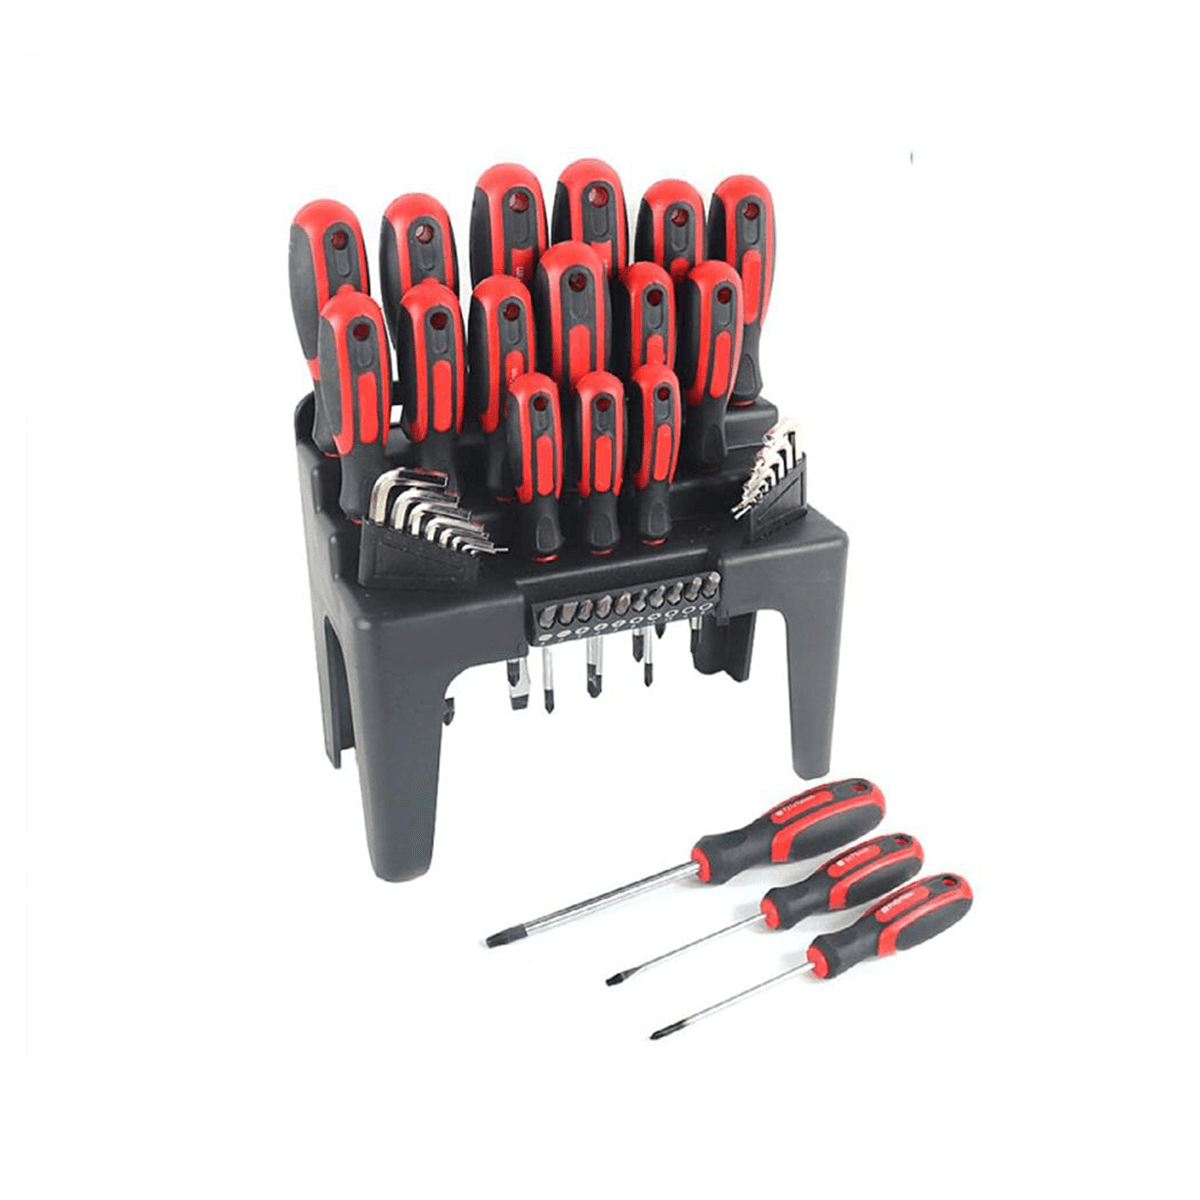 44pcs Cr-v Carbon Steel Profesional Multifunction Magnetic Screwdriver Set with Hexagon Wrench set and Bits